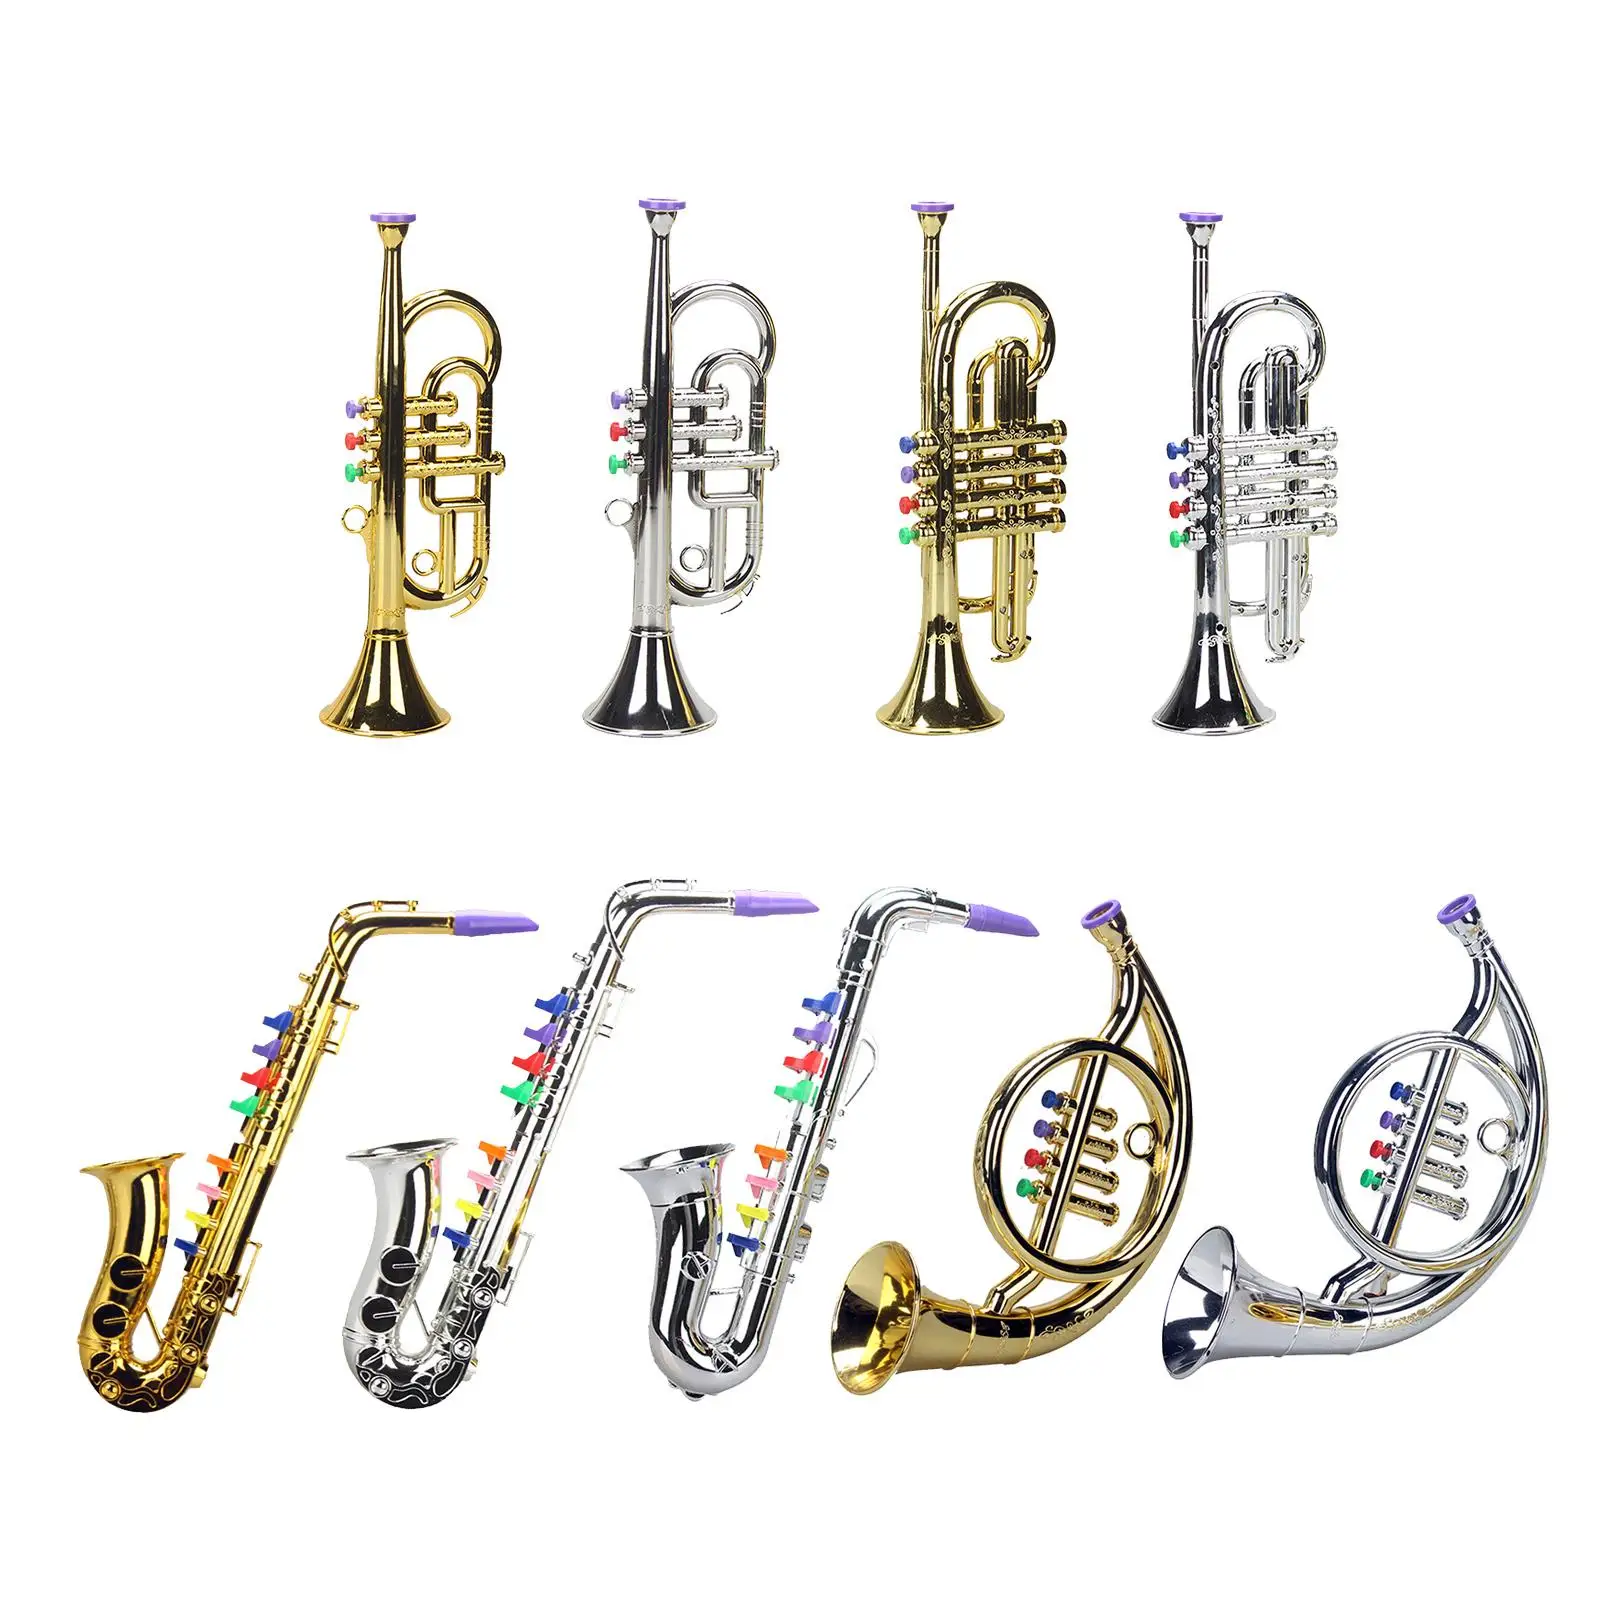 Musical ABS Saxophone Mini 8 Notes Play Musical Instrument with Color Keys for Party Children Ages 3+ Preschool